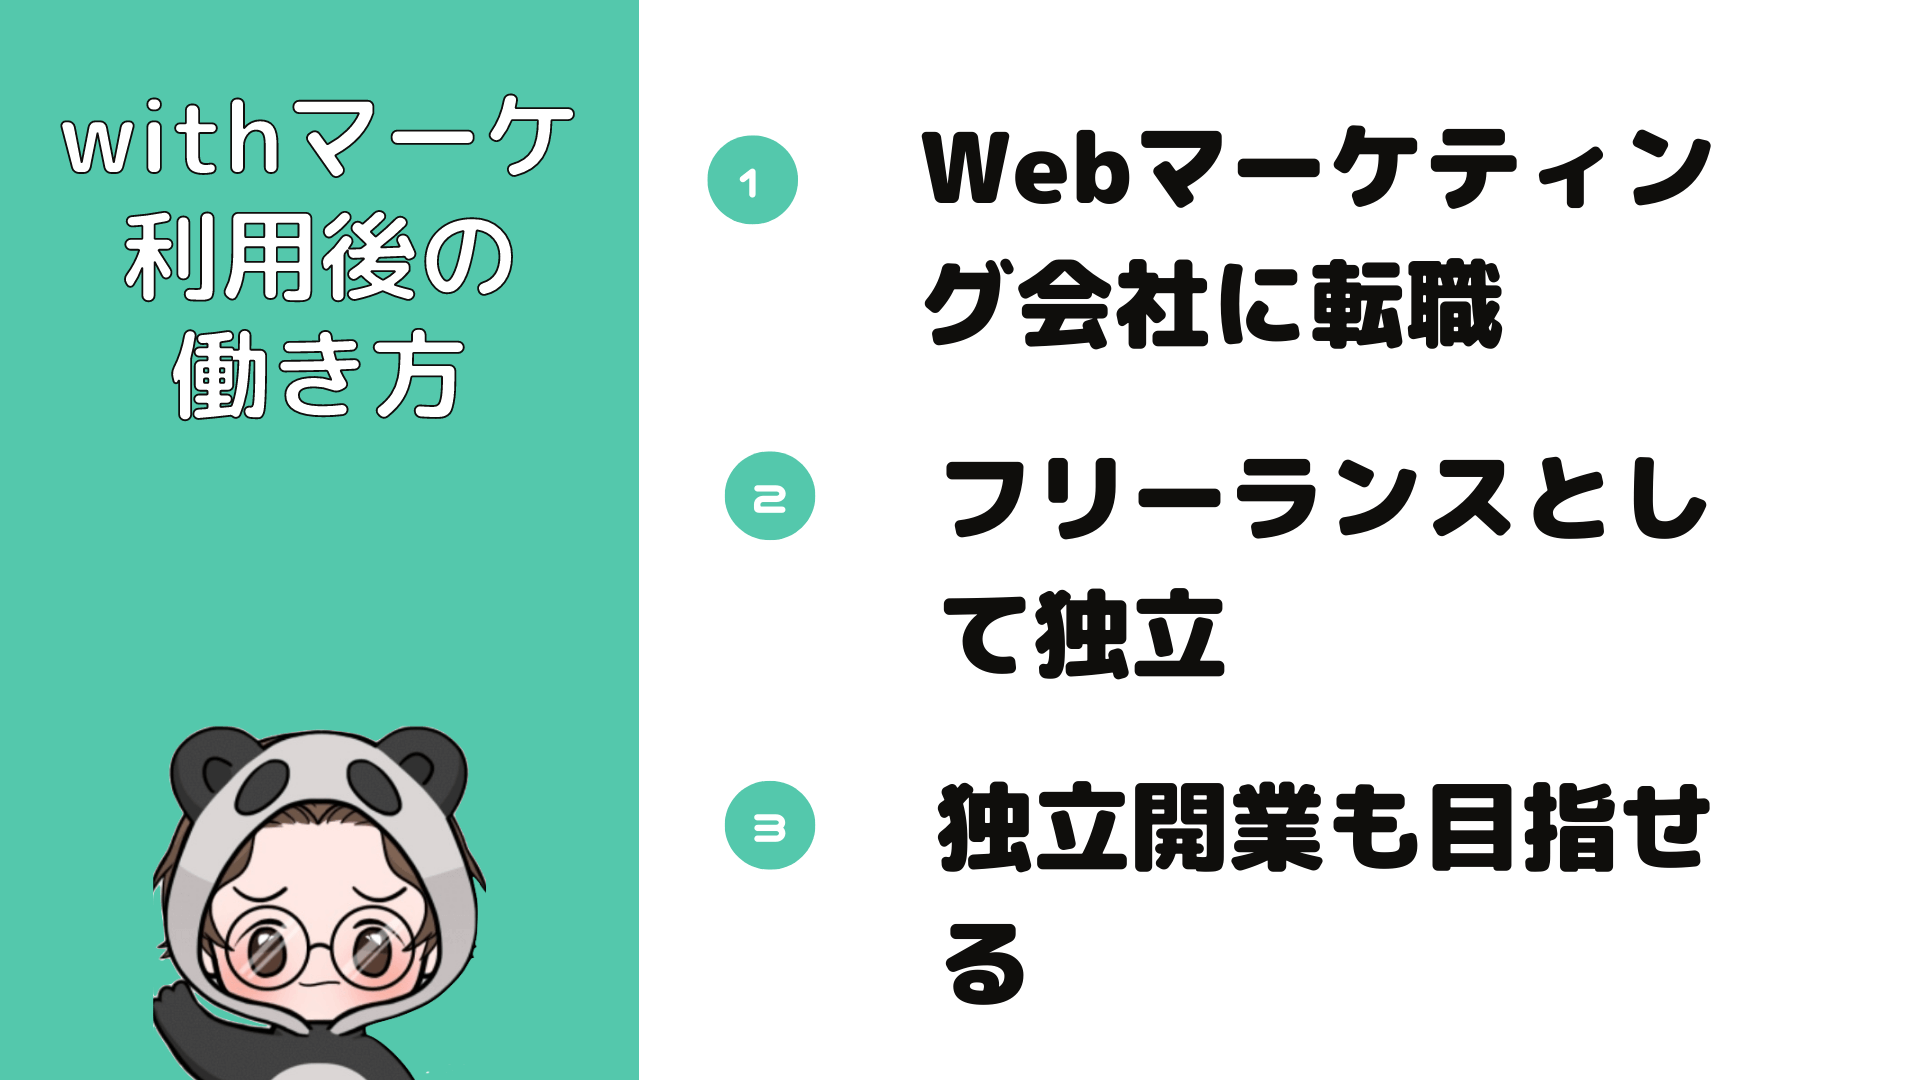 withマーケ_評判_withマーケの利用後の働き方は？